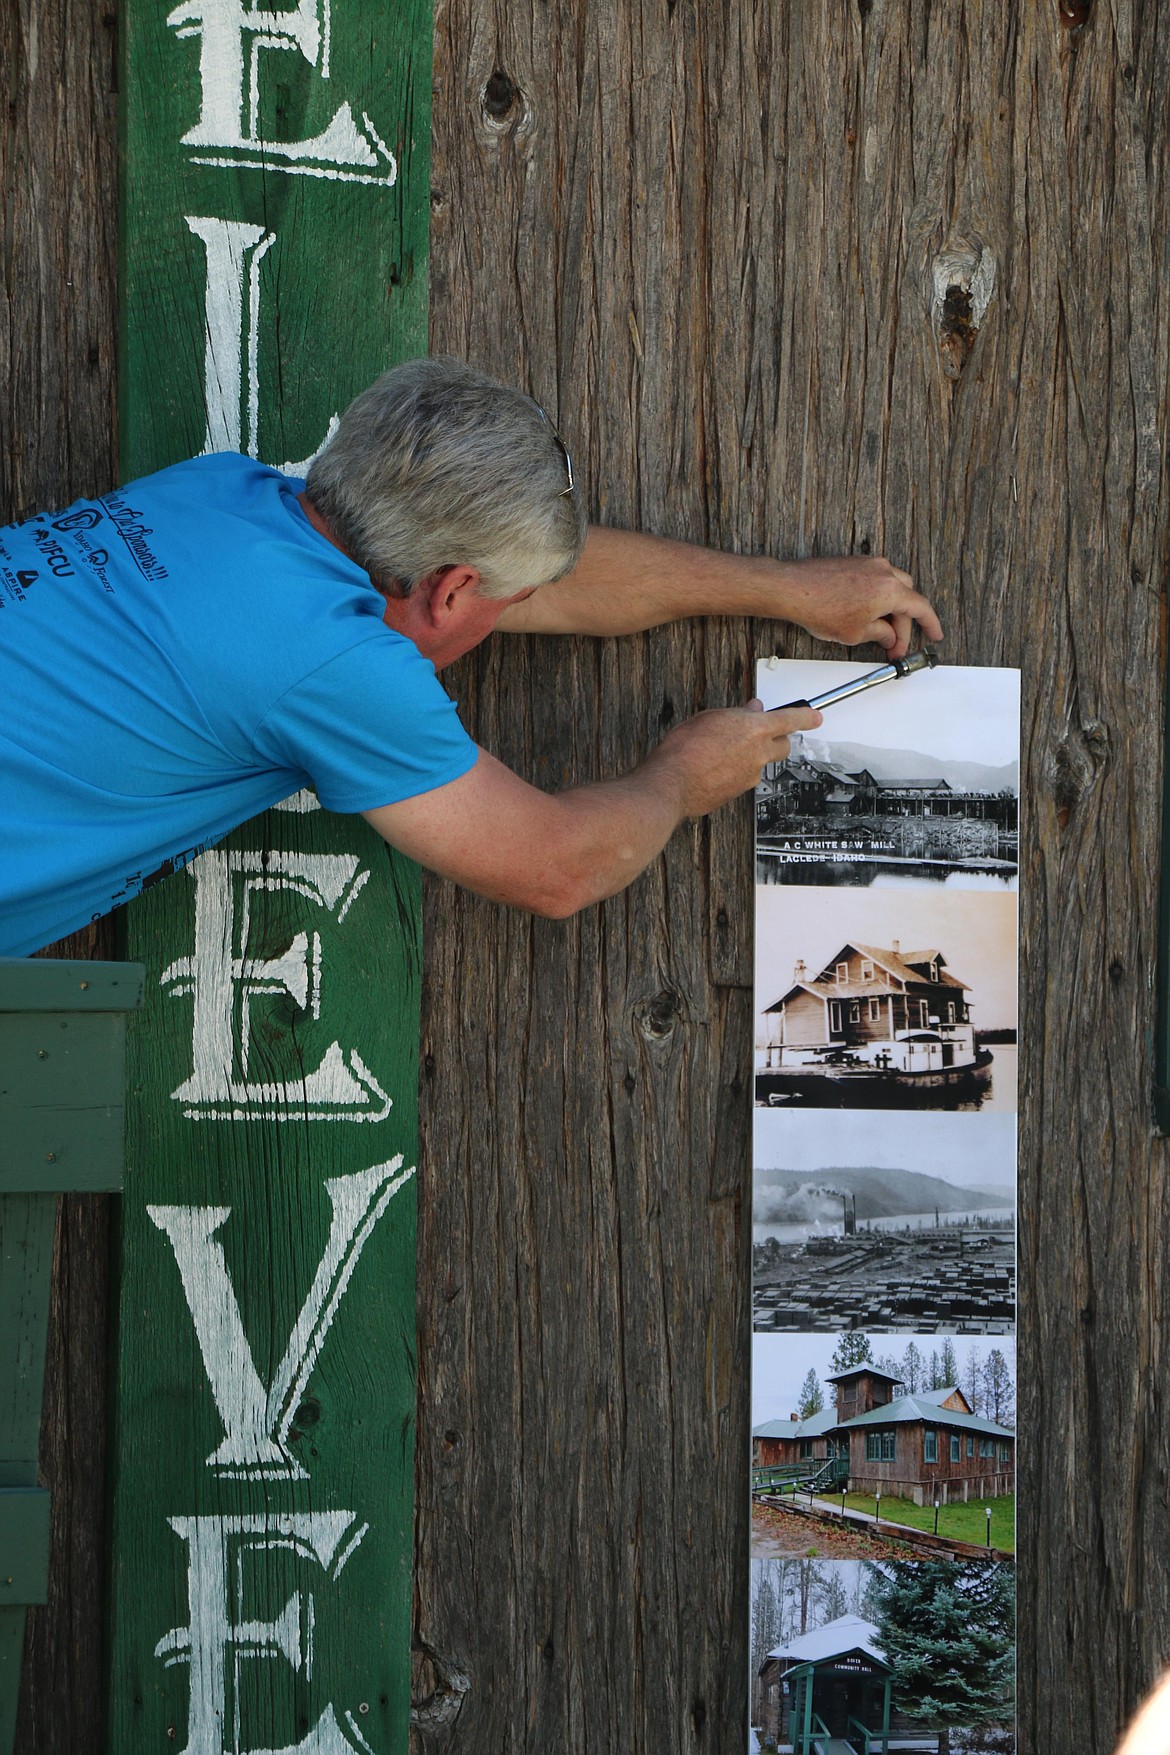 A Dover resident puts up a display of historic photos showing Dover's early days in preparation for a community barbecue. The celebration was among the things highlighted by Dover Mayor George Eskridge during his talk at the Greater Sandpoint Chamber of Commerce's "State of the Cities" event.